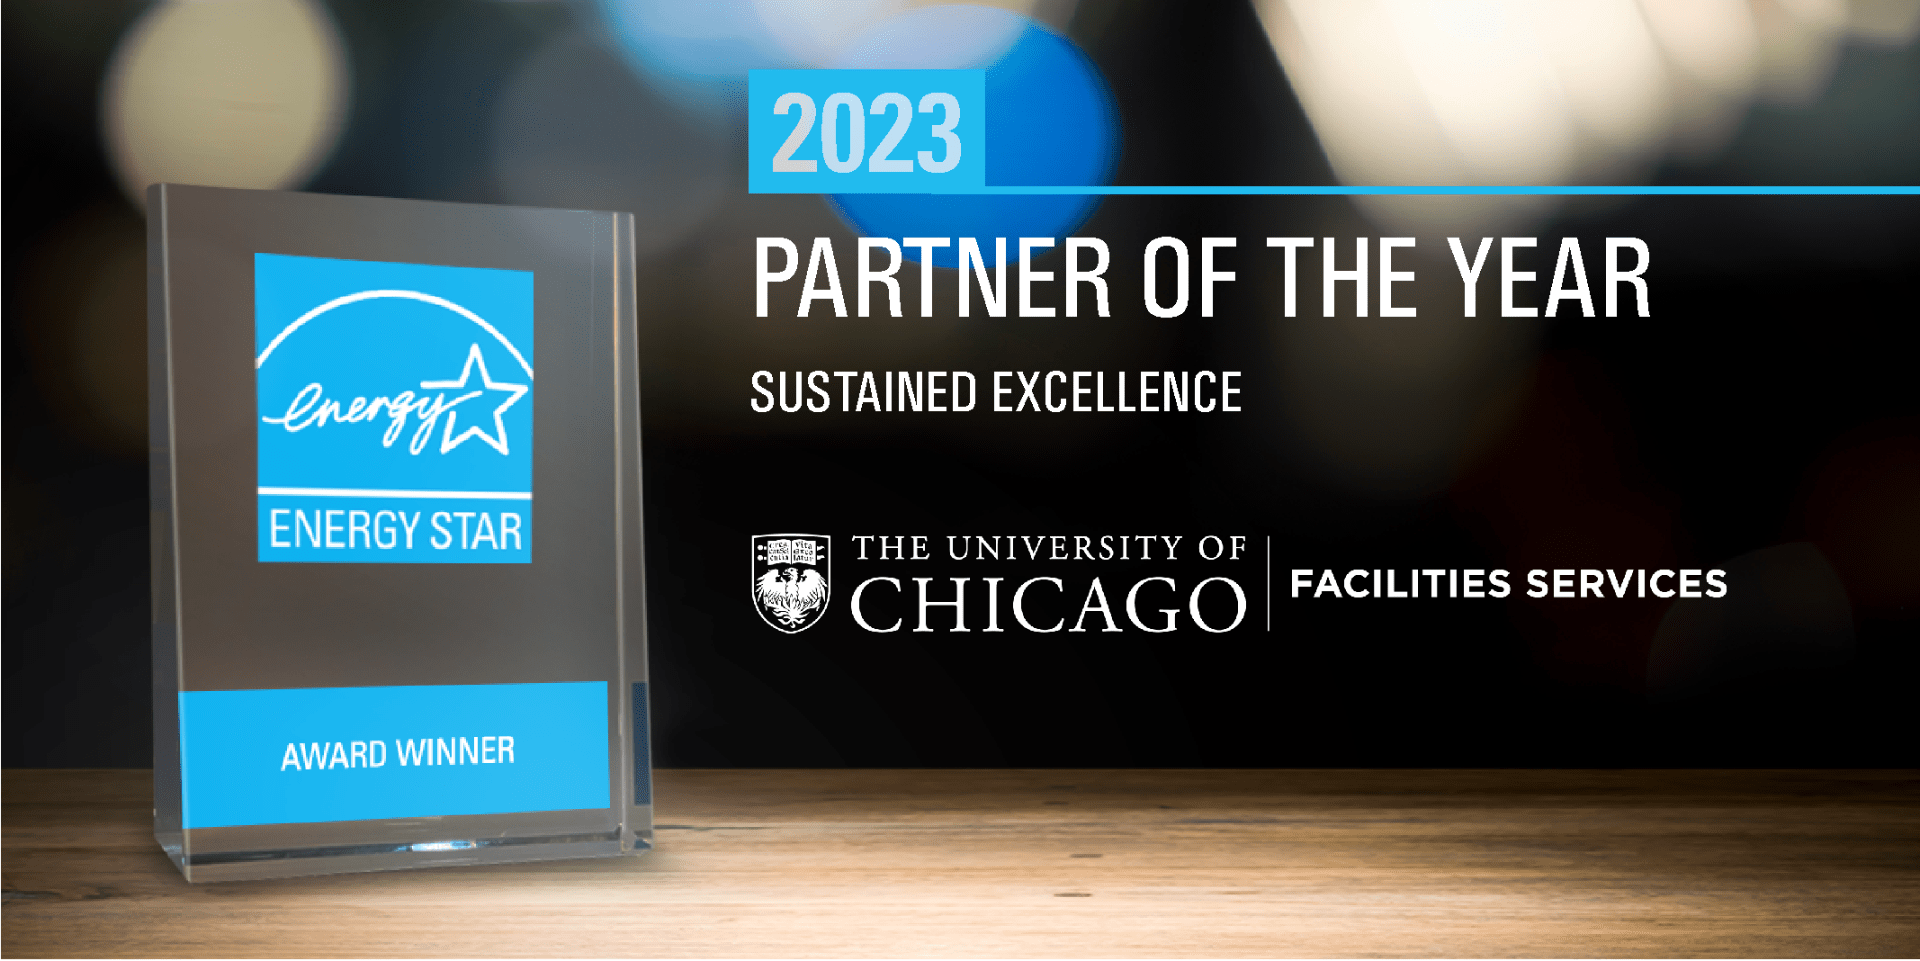 Energy Star partner of the year award logo and plaque for UChicago 2023